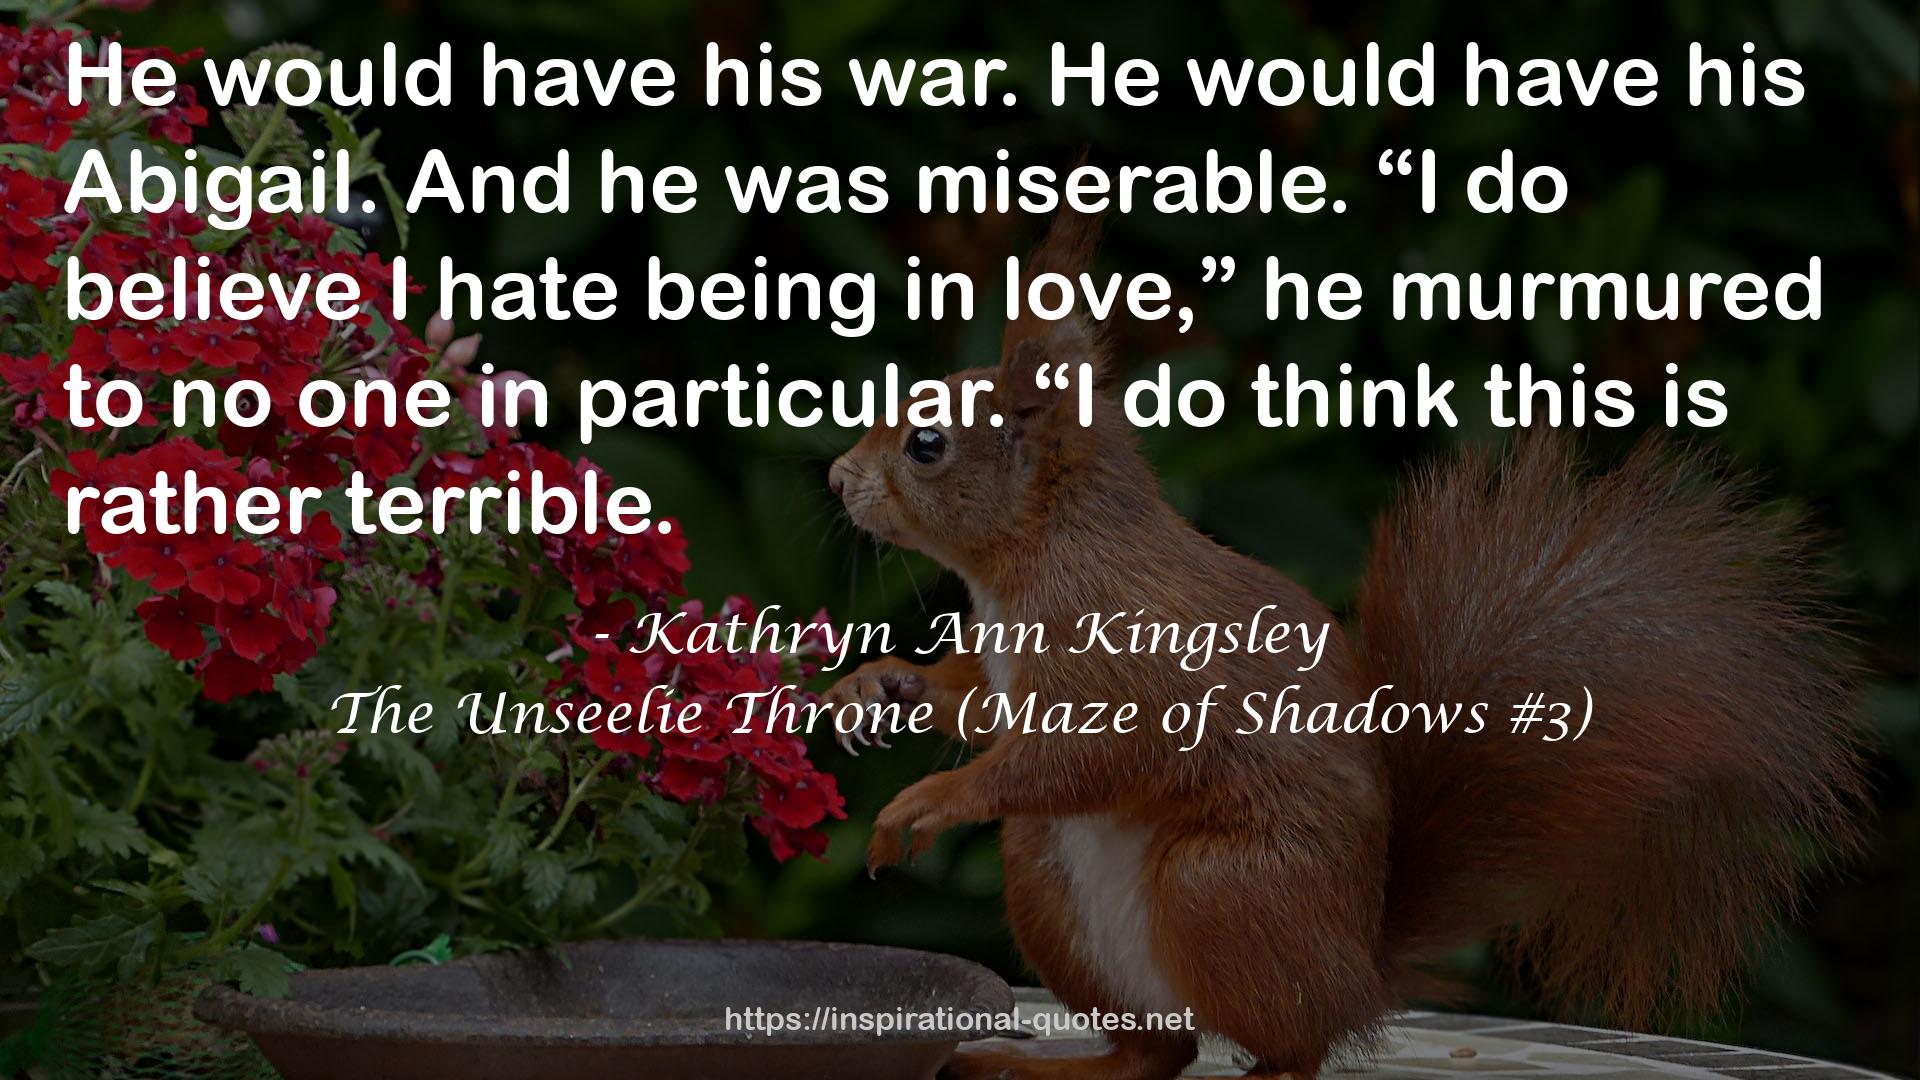 The Unseelie Throne (Maze of Shadows #3) QUOTES